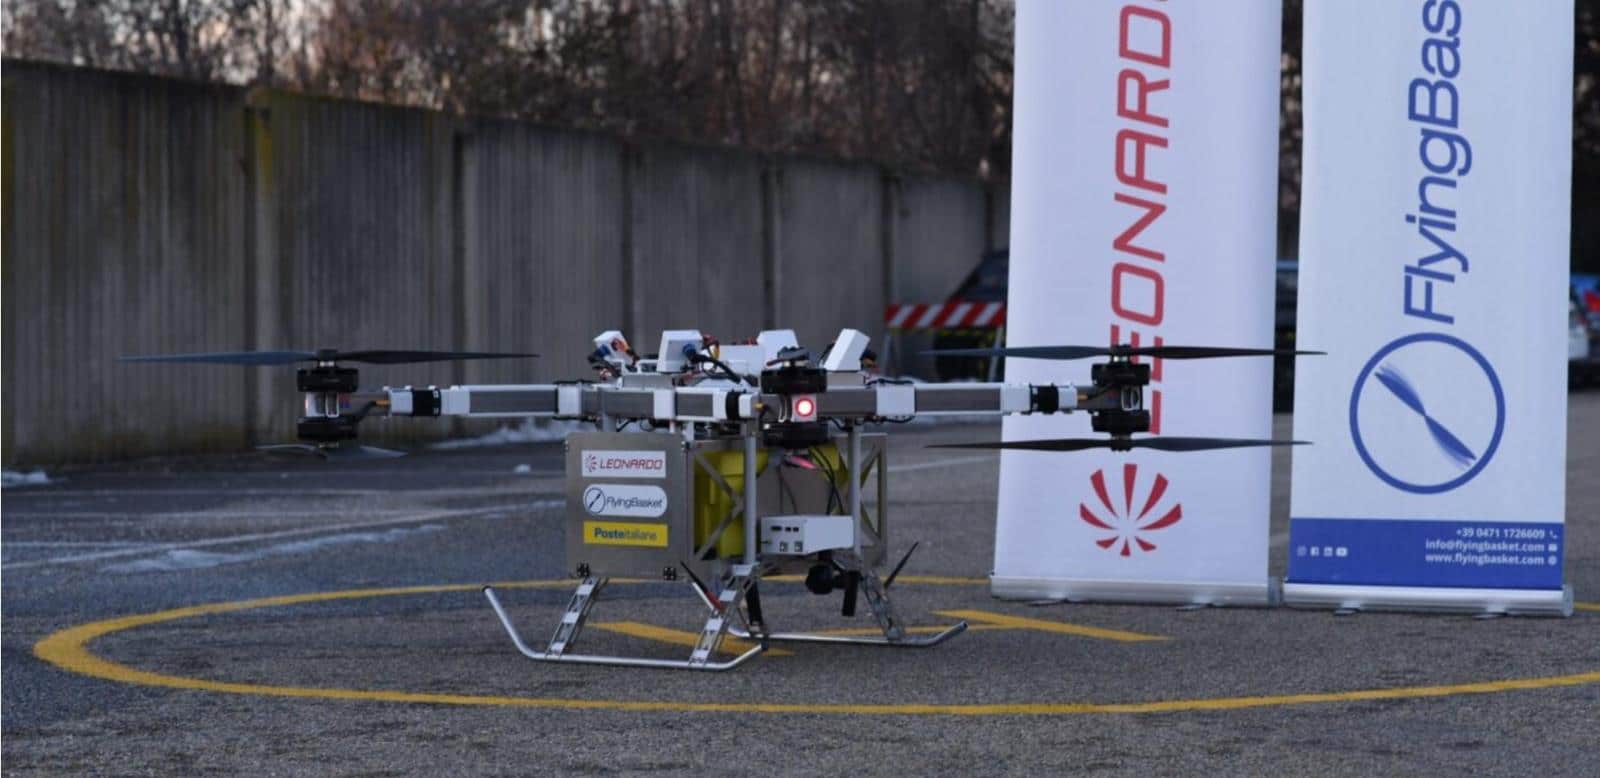 FB3 transport drones can fly with 100 kg payloads and have just proven their worth